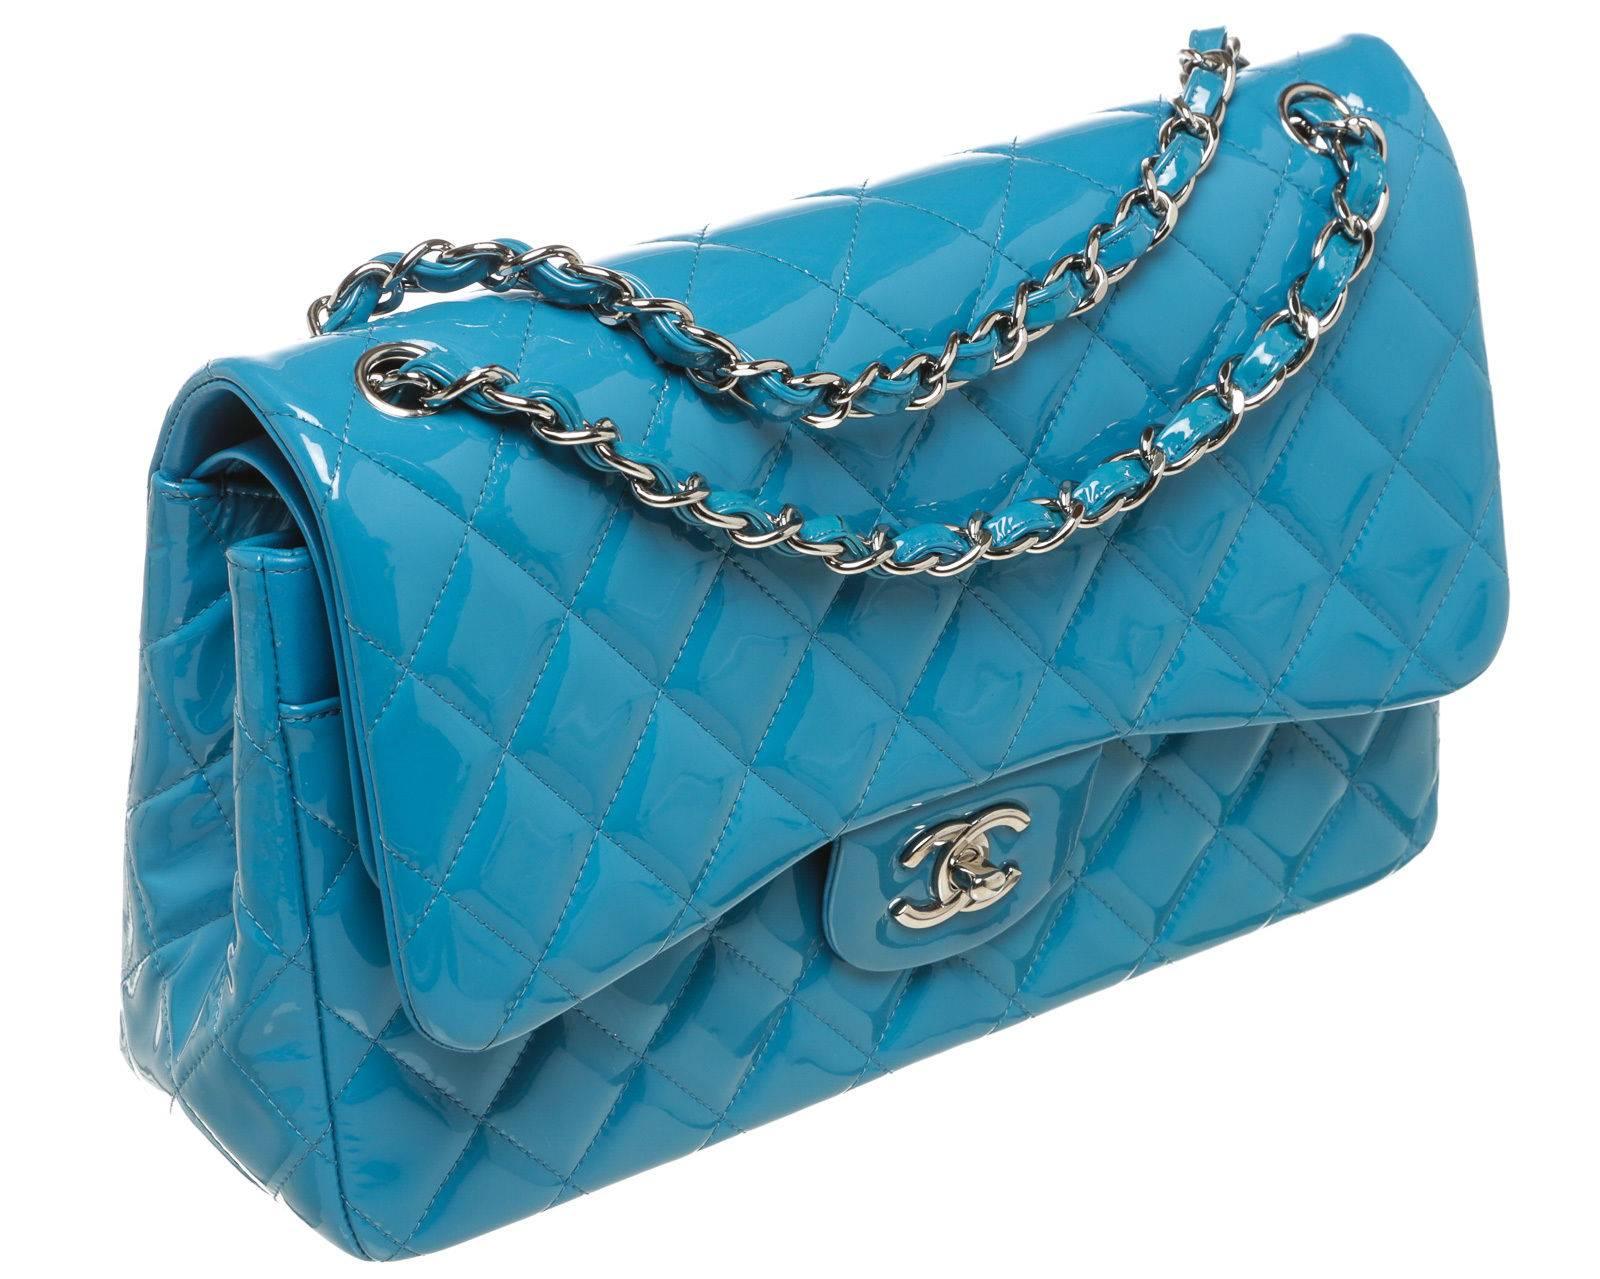 Designer: Chanel
Type: 
Handbag
Condition: 
Exterior: Good Condition 
Interior: Good Condition 
Color: 
Blue
Material: 
Patent Leather
Dimensions: 
11.75